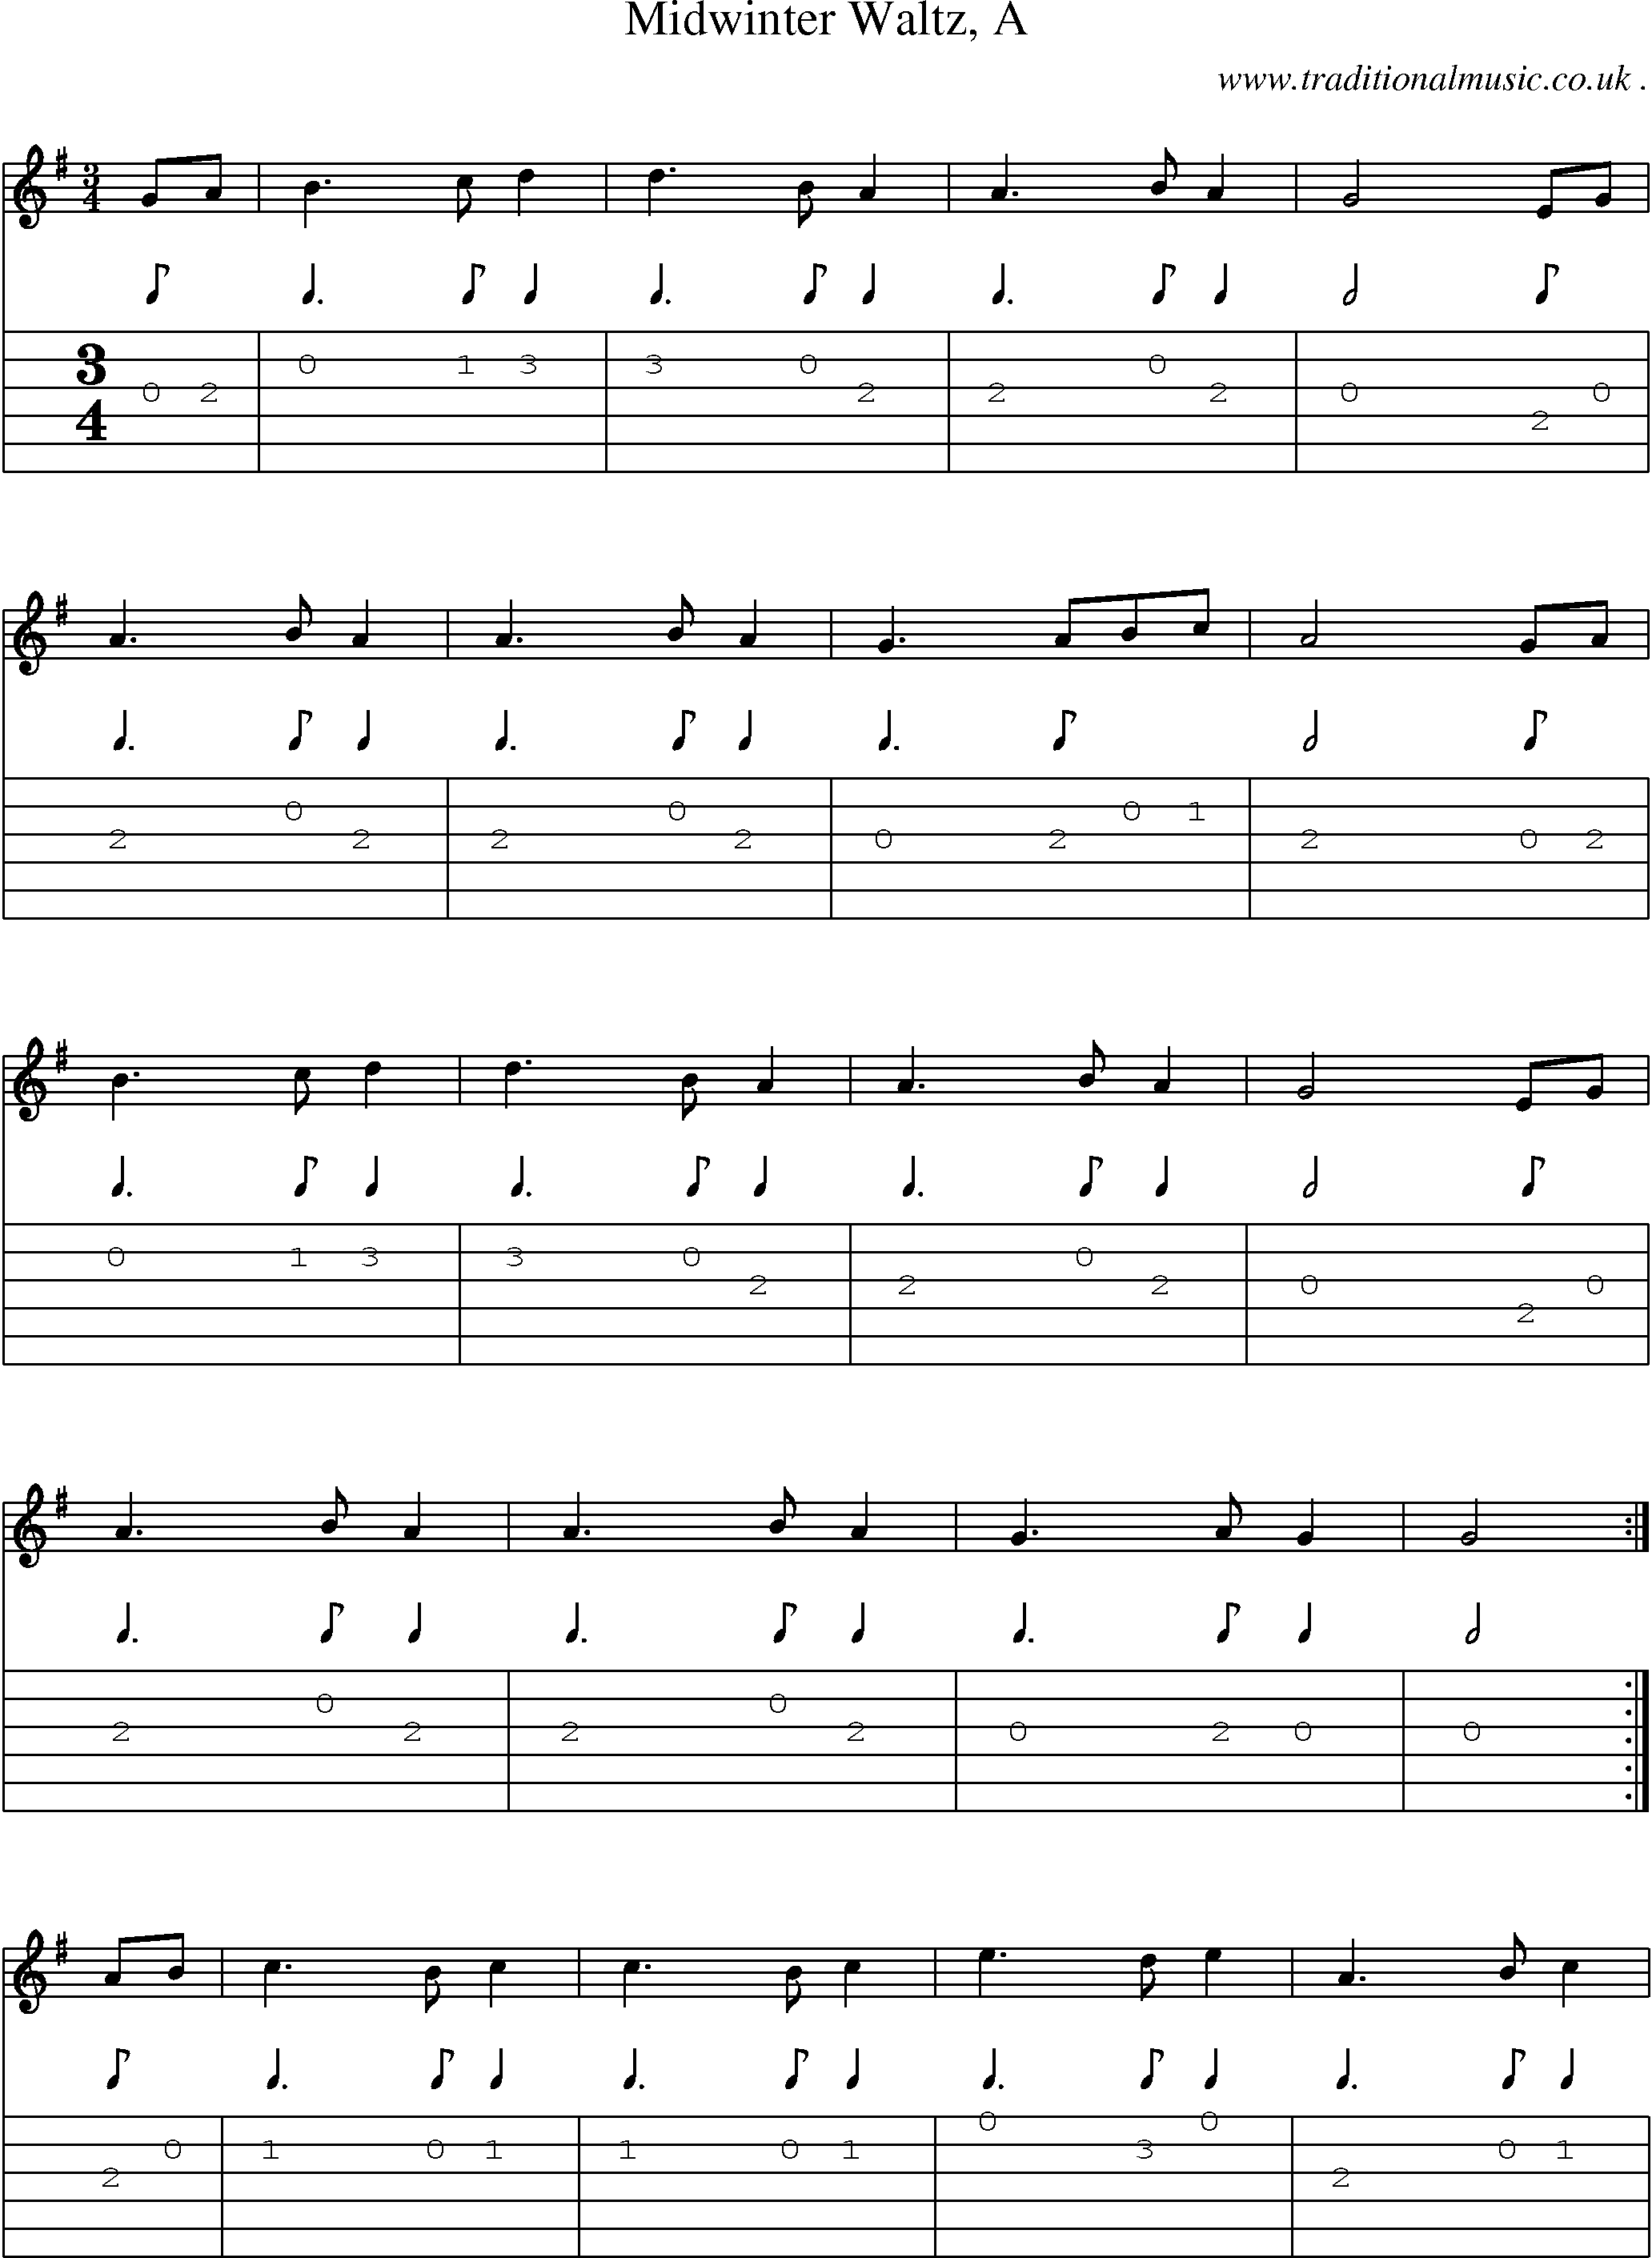 Sheet-music  score, Chords and Guitar Tabs for Midwinter Waltz A